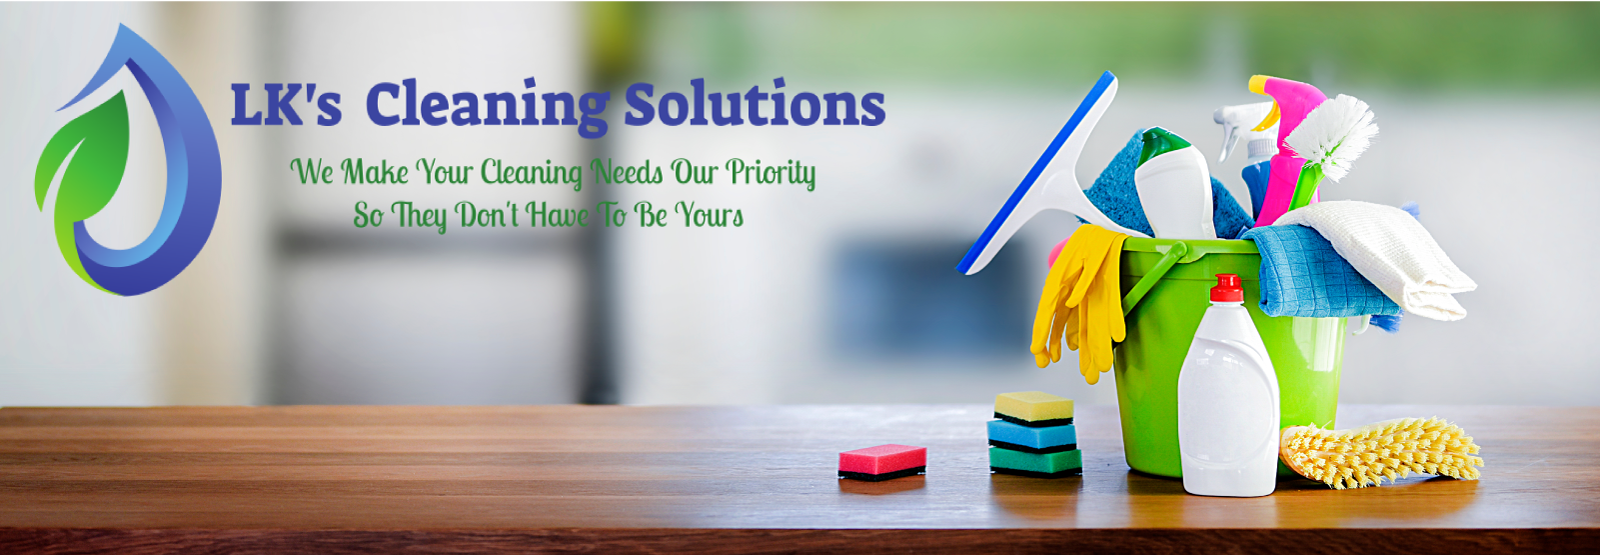 lks cleaning solutions header image